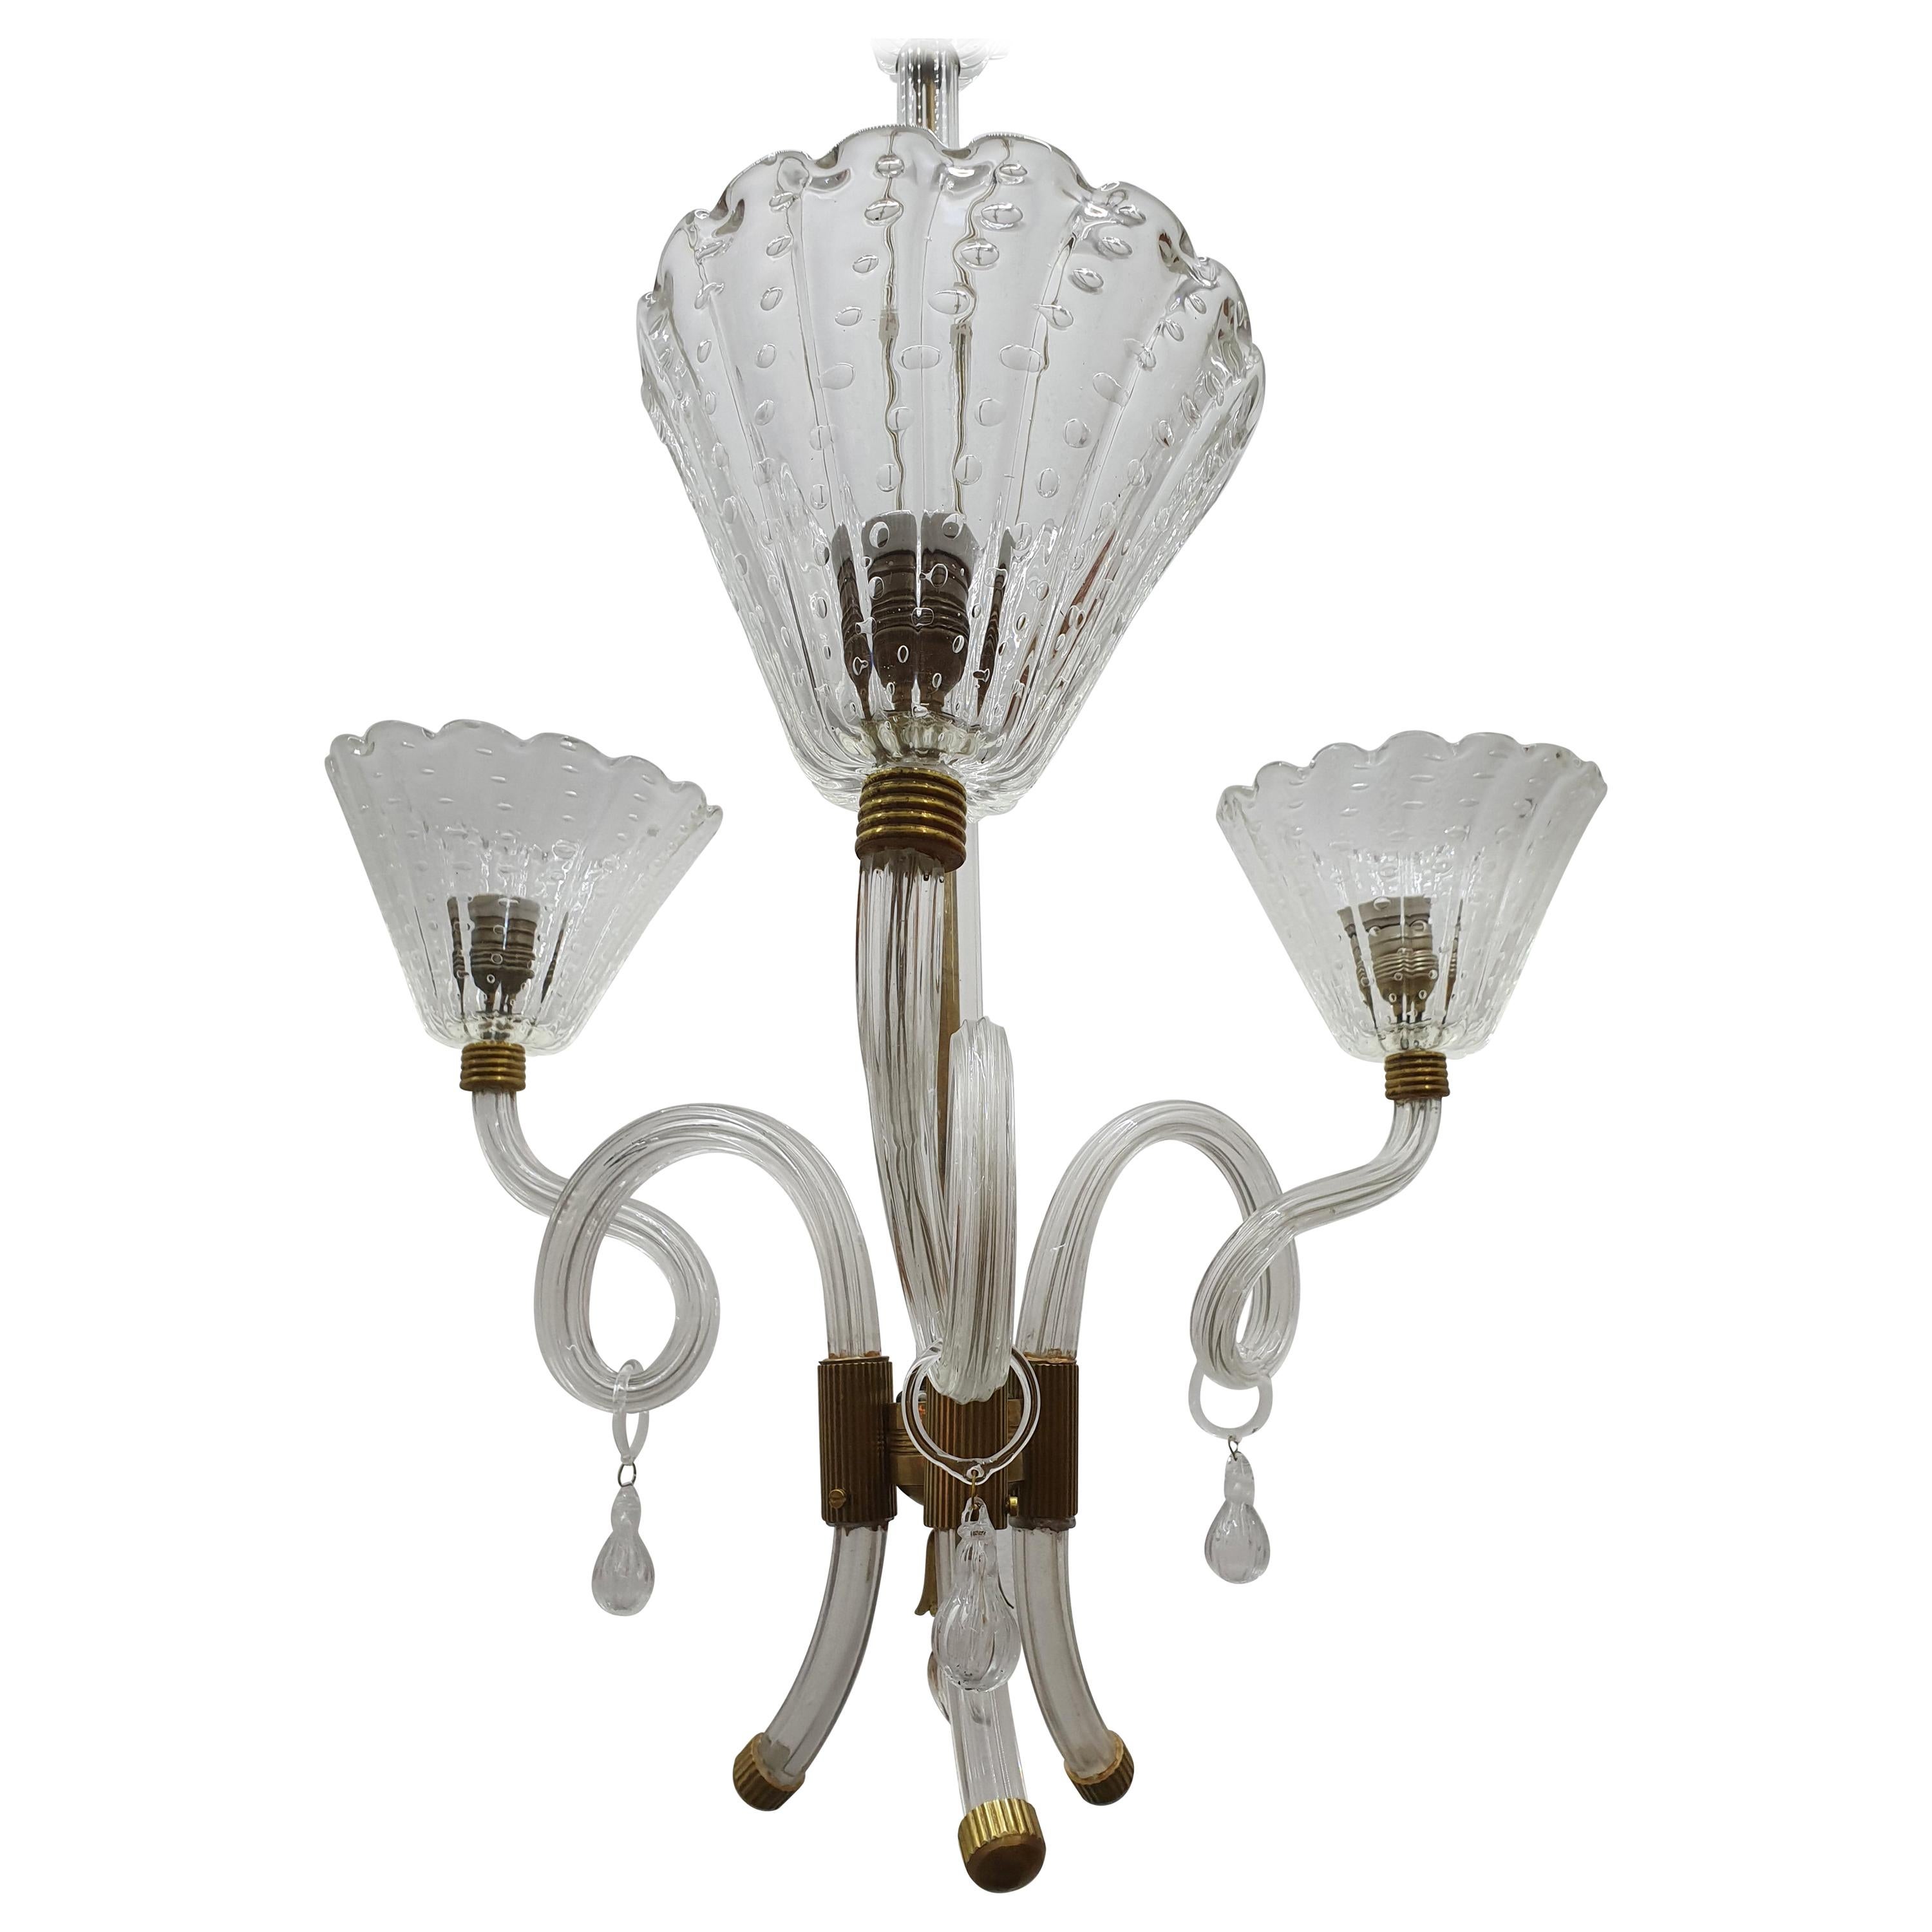 Mid-Century Modern Chandelier by Barovier Toso in Murano Glass, Italy circa 1950